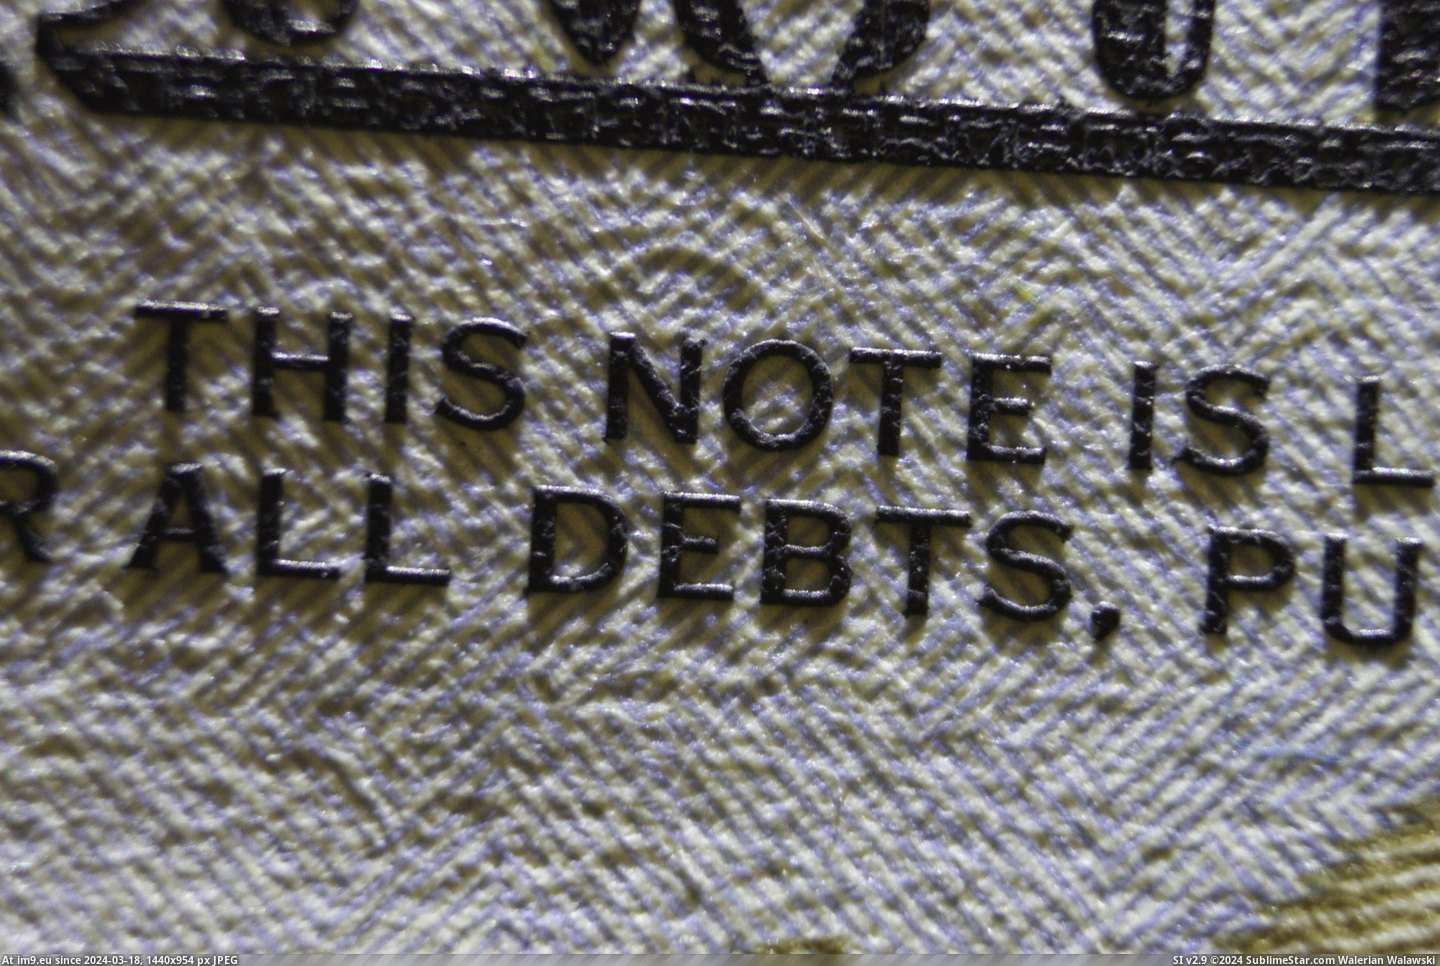 #Bill #Ink #Dollar [Pics] Ink thickness on a US dollar bill Pic. (Image of album My r/PICS favs))